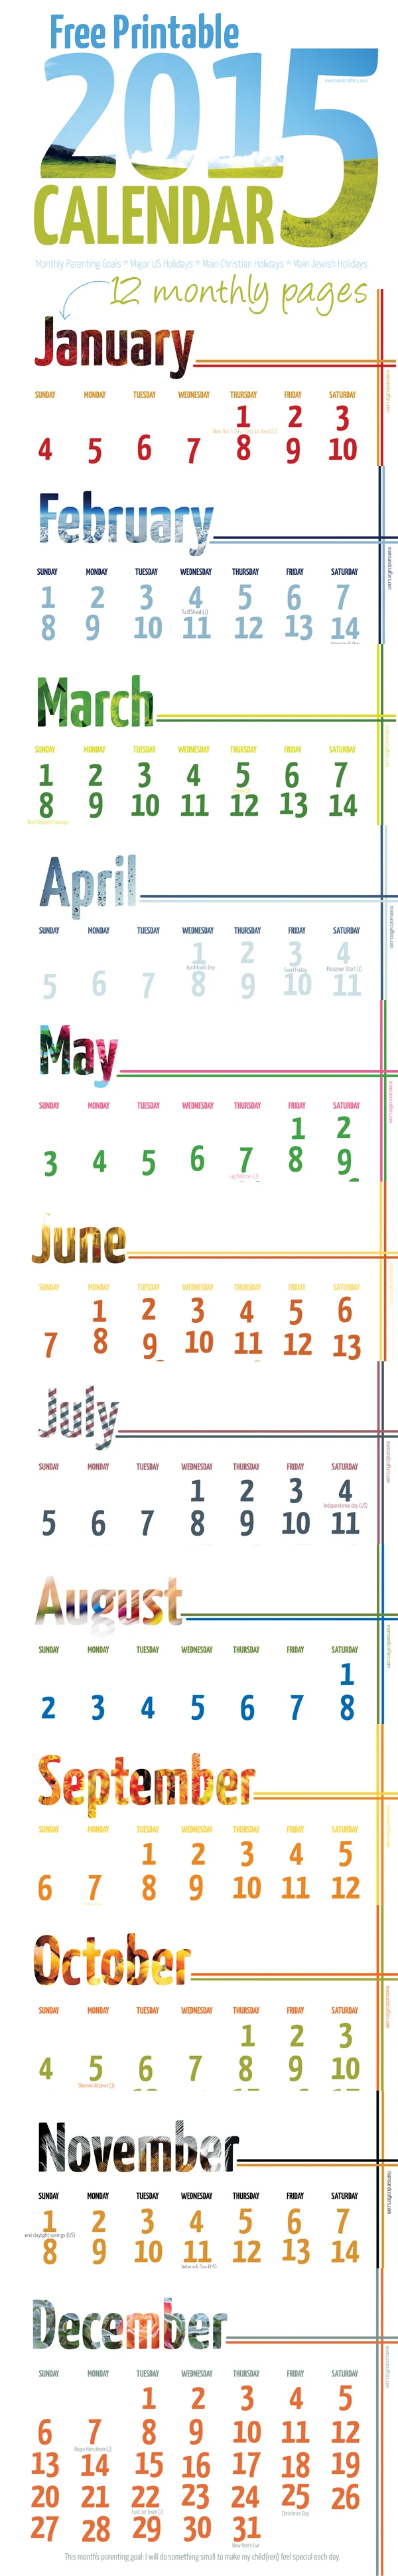 Free printable 2015 calendar complete with parenting goals and objectives!! Fun and smart and wallet-friendly as it uses less ink to print because of the white background. Monthly wall calendar download!